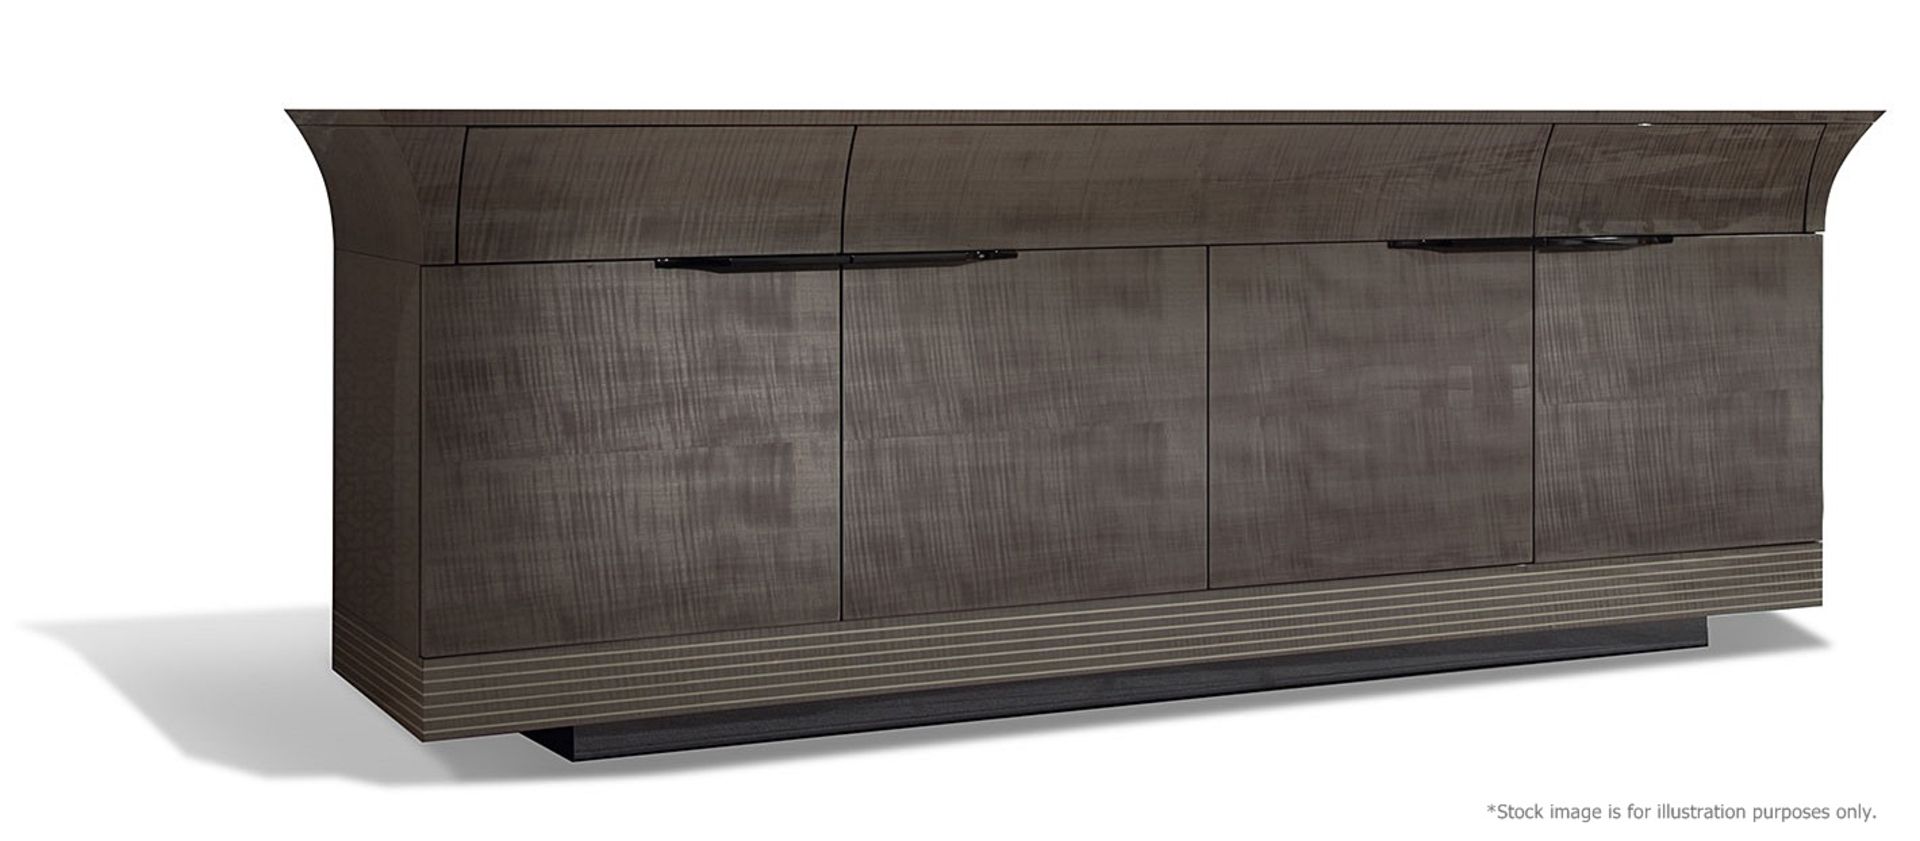 1 x GIORGIO COLLECTION 'Alchemy' Buffet / Sideboard Unit (Model: 6810/80) - Original RRP £3,495 - Image 4 of 8